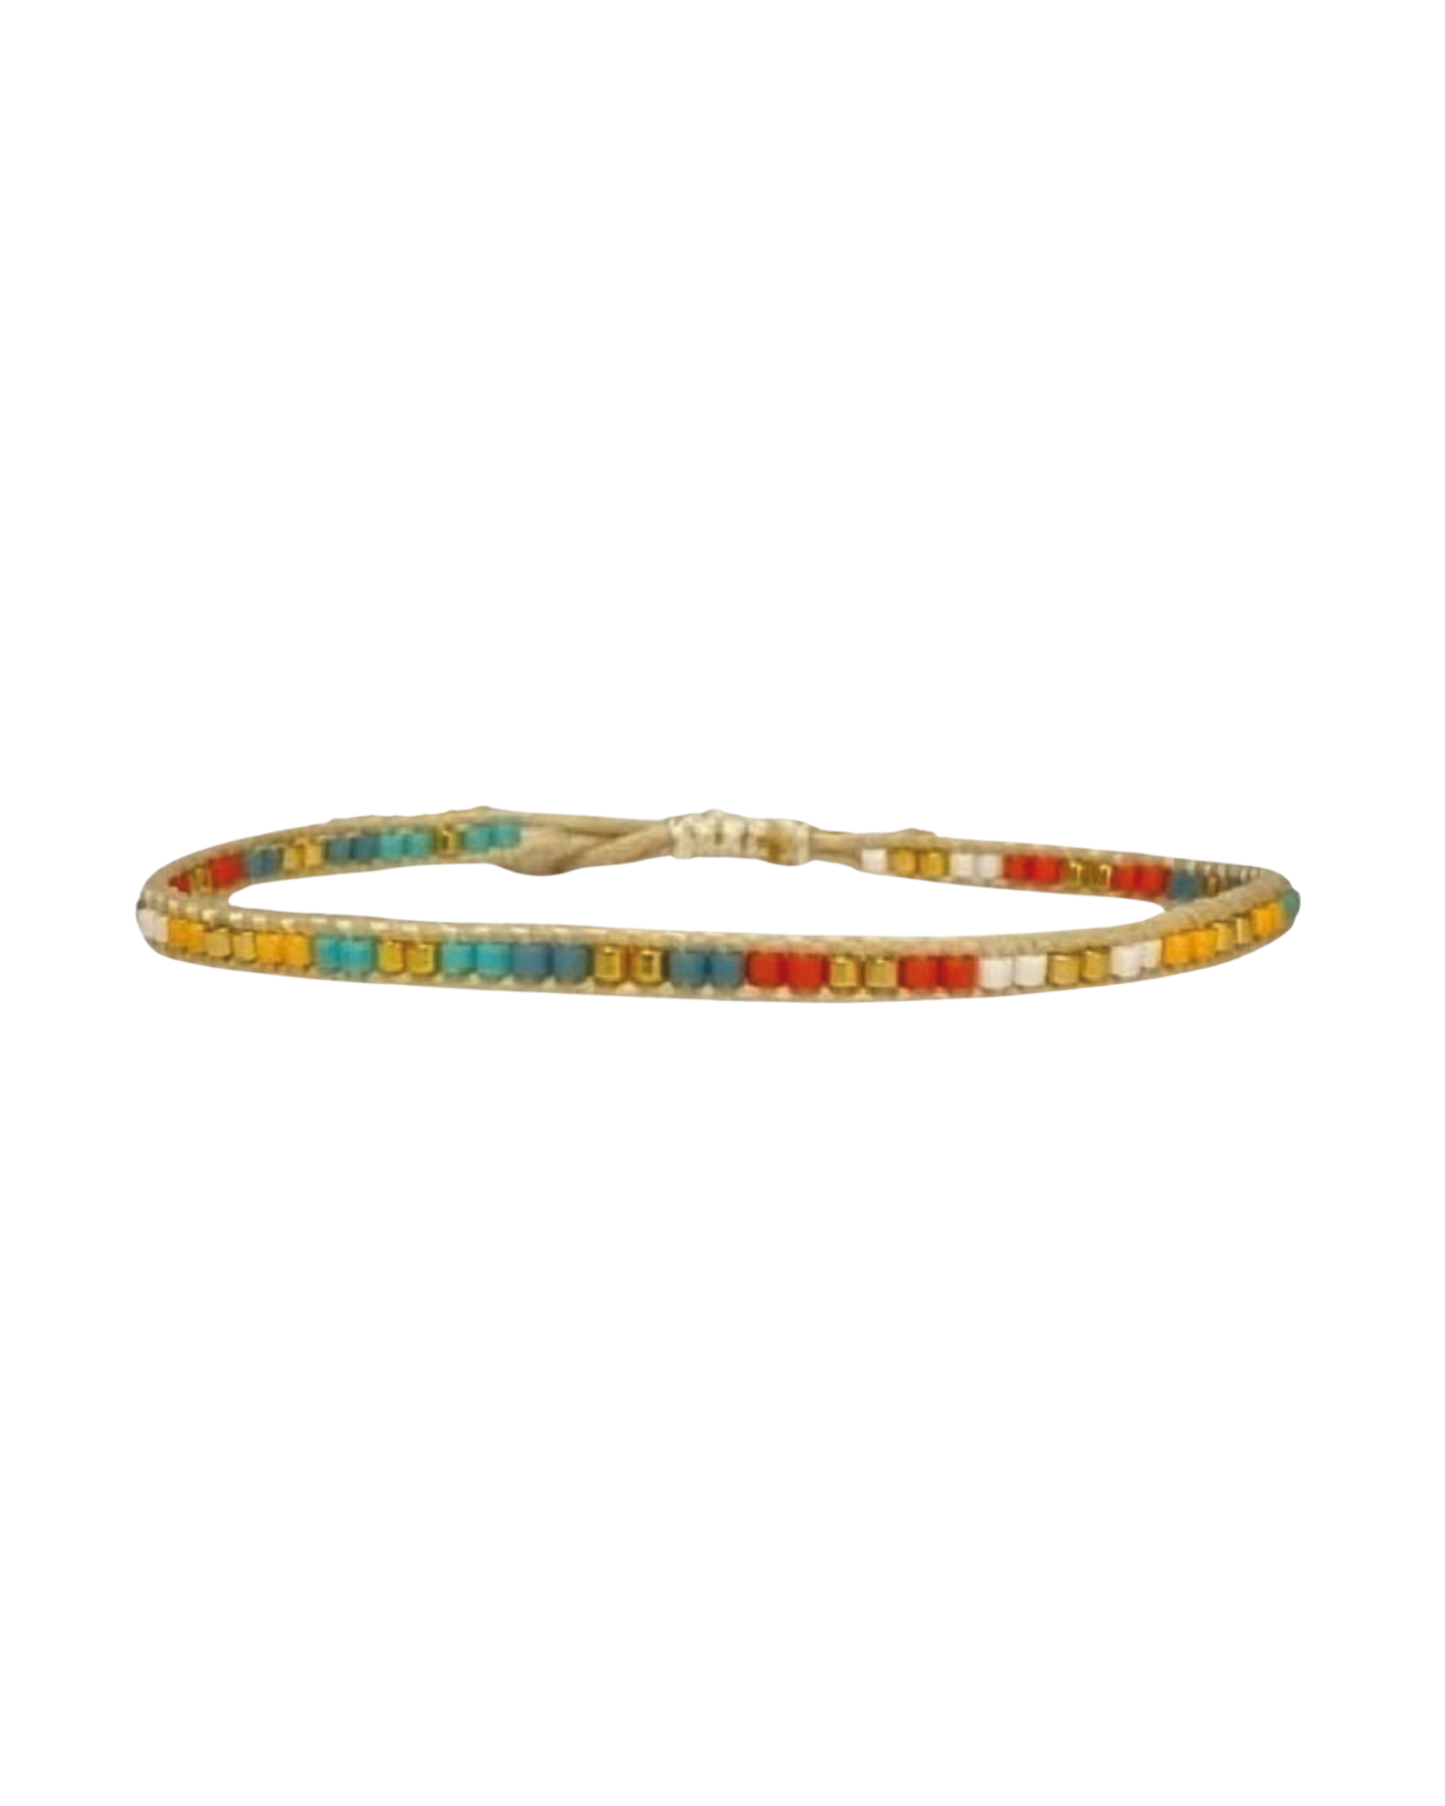 Cute turquoise yellow string beaded bracelet